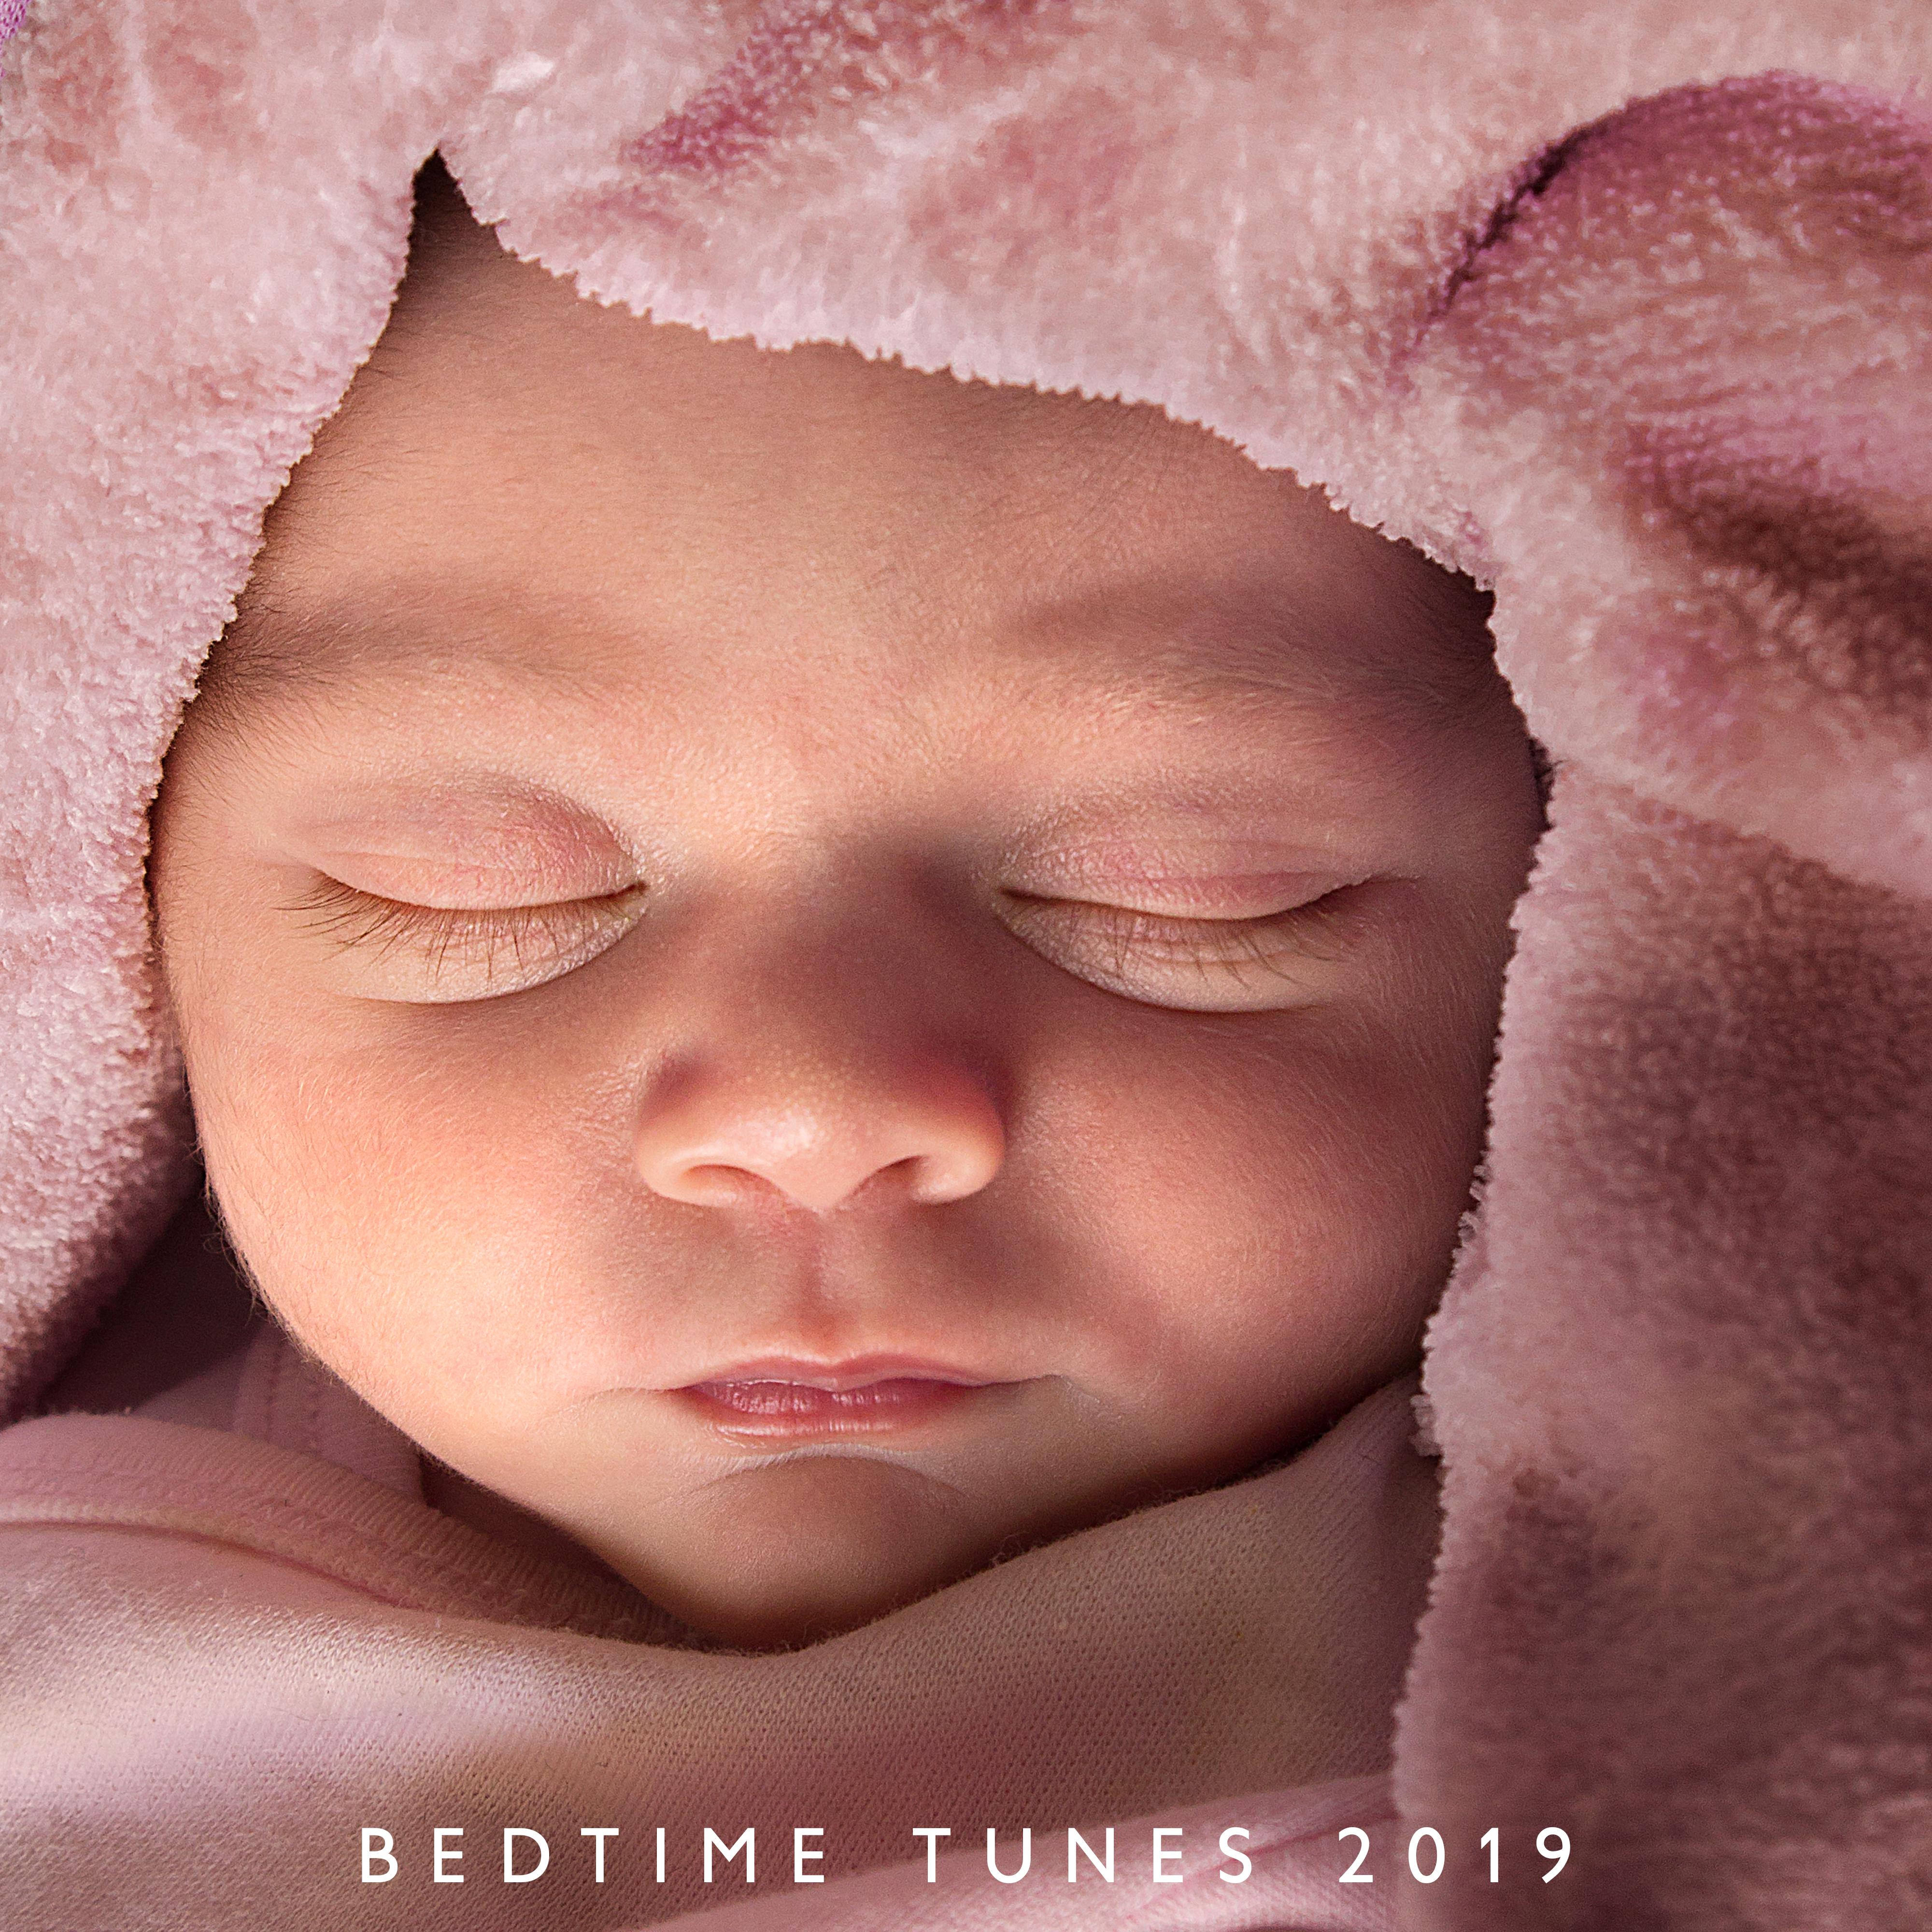 Bedtime Tunes 2019  Soothing Lullabies for Baby, Calming Melodies, Deeper Sleep, Nap Time, Music for Baby at Night